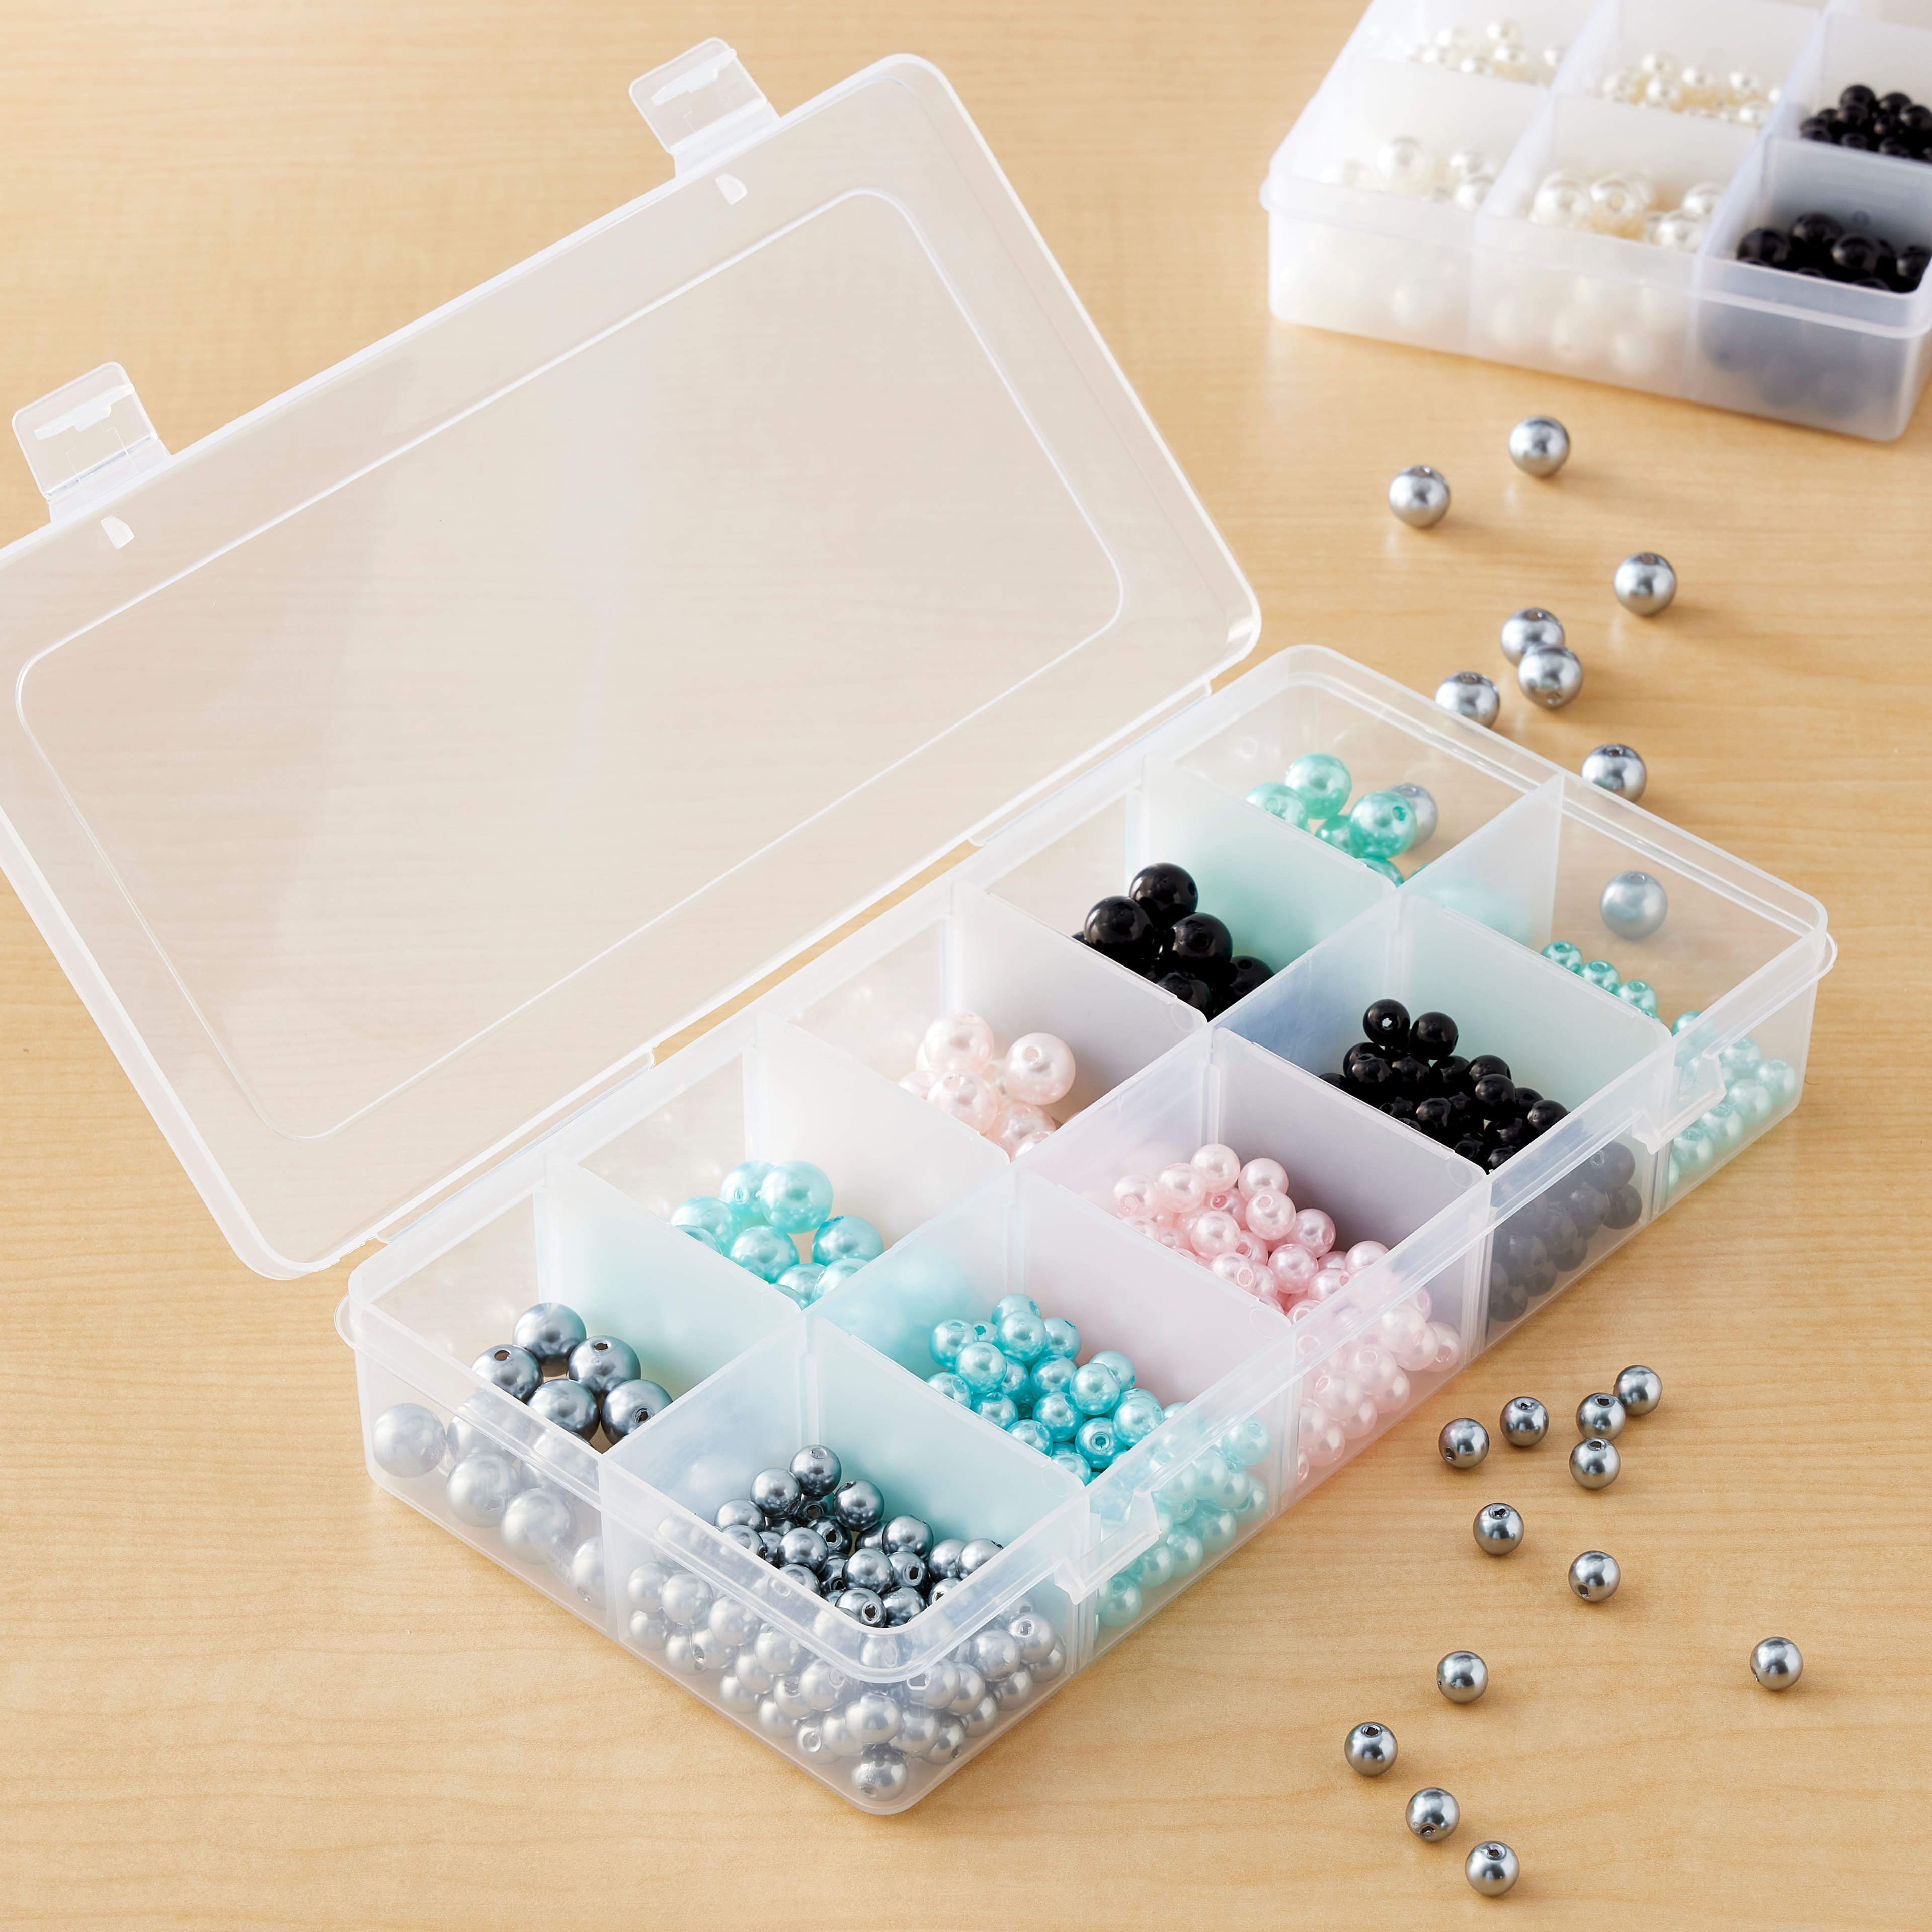 12 Pack: 12 Jar Bead Organizer by Bead Landing, Size: 6.2” x 4.75” x 2”, Other